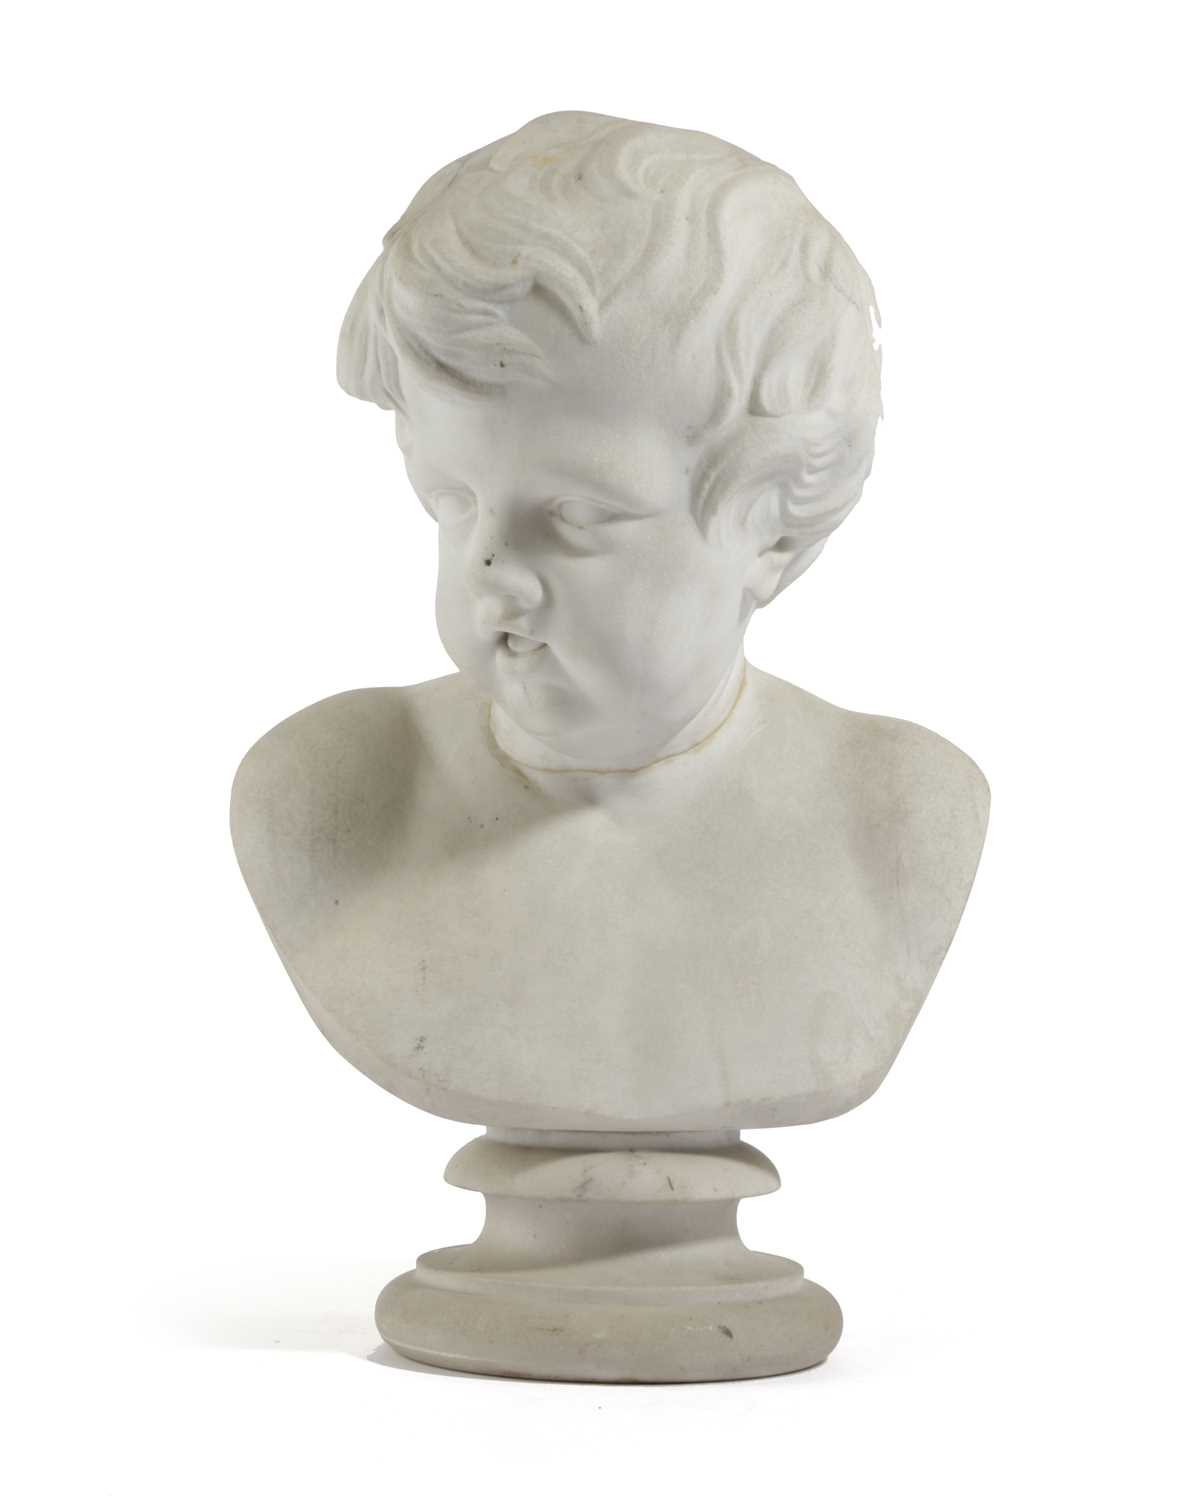 A FRENCH MARBLE BUST OF A YOUNG BOY IN THE MANNER OF FRANCOIS DUQUESNOY (FLEMISH 1597-1643), 18TH